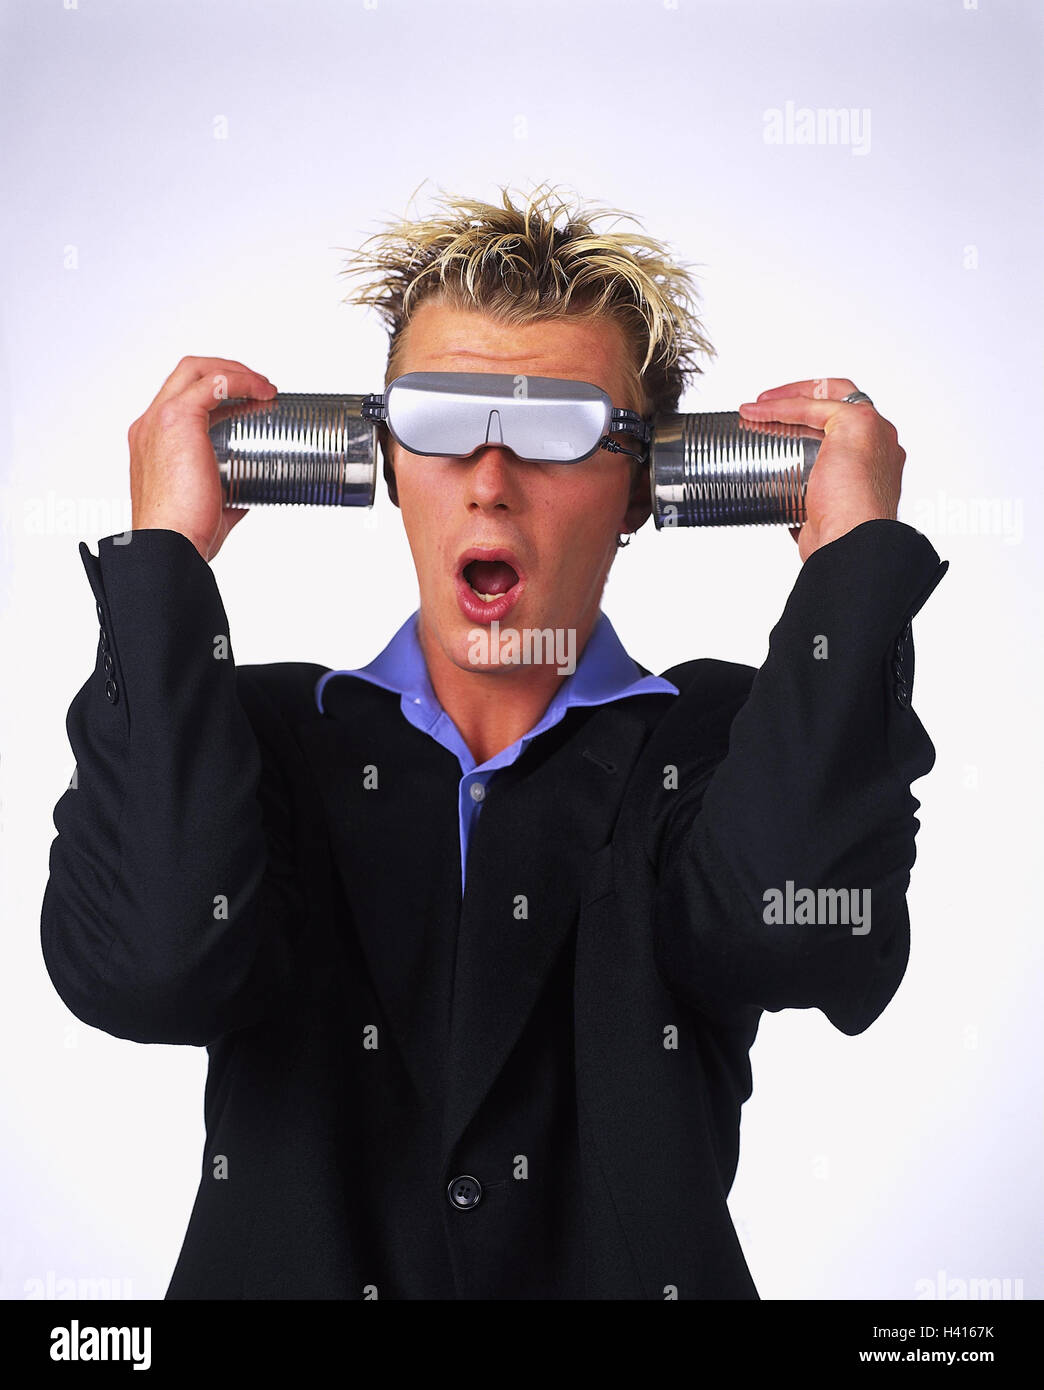 Cyberspace, man, young, glasses, tins, ears, hold, facial play, half portrait, concepts, selftinkered, virtual reality, communication, technology age, studio, cut out, 'Do-it-yourself' Stock Photo